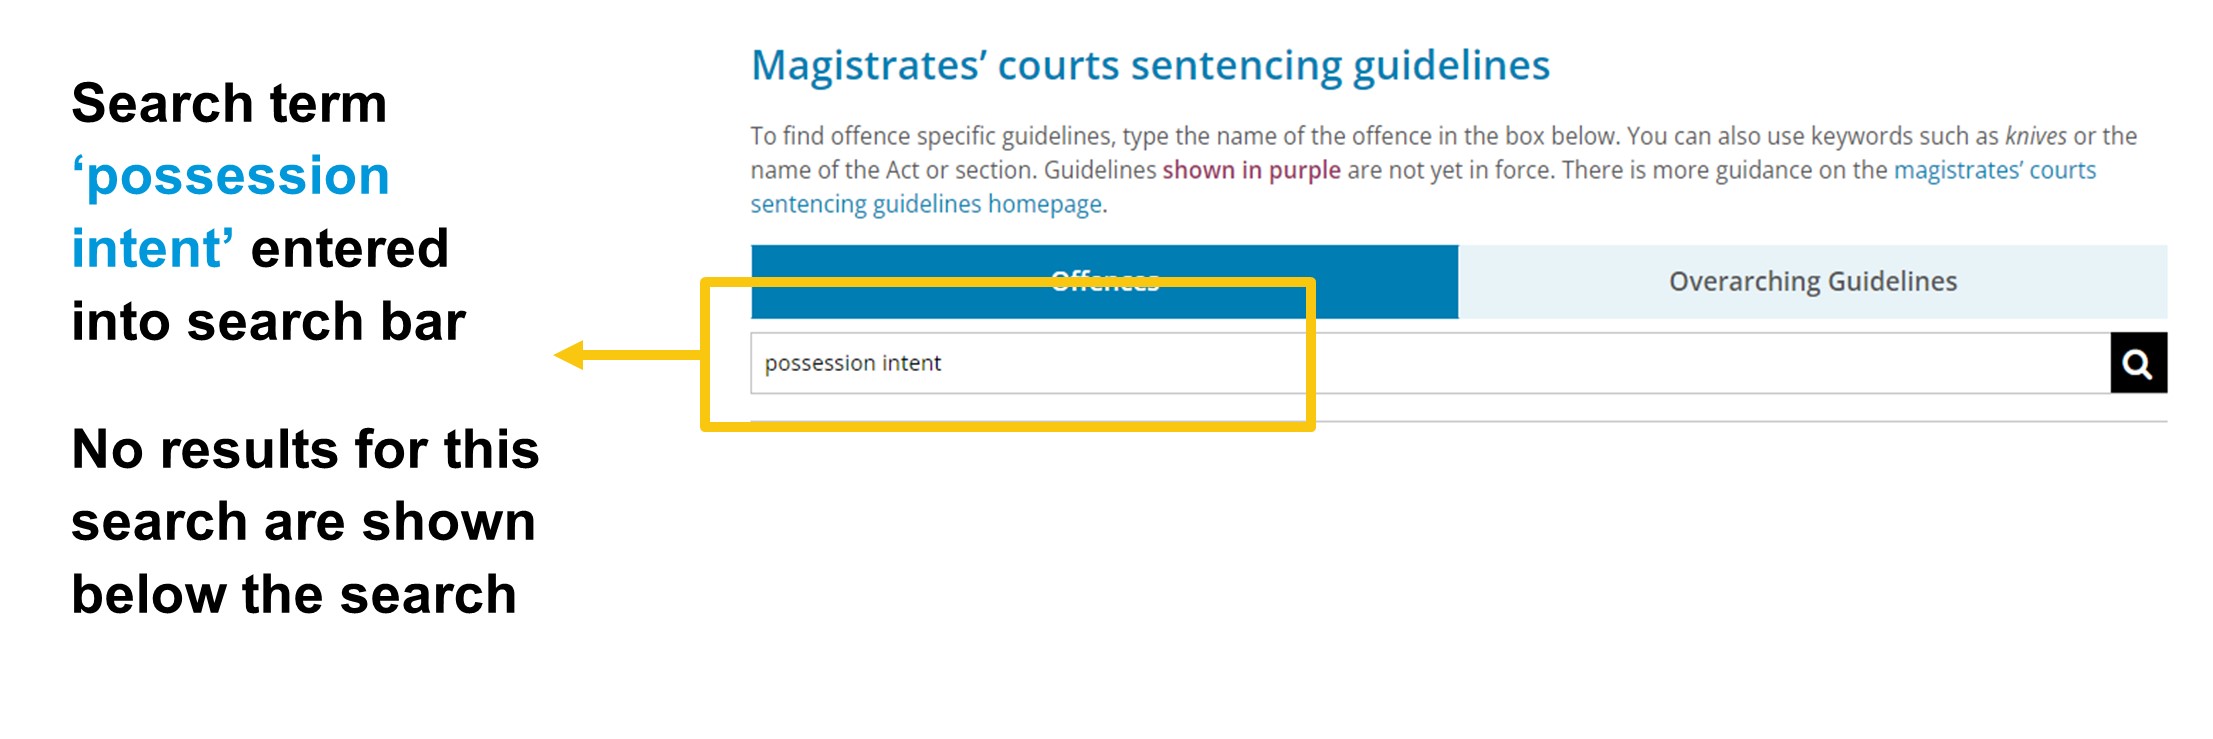 Image showing how entering "possession intent" into the guideline search bar produced no results